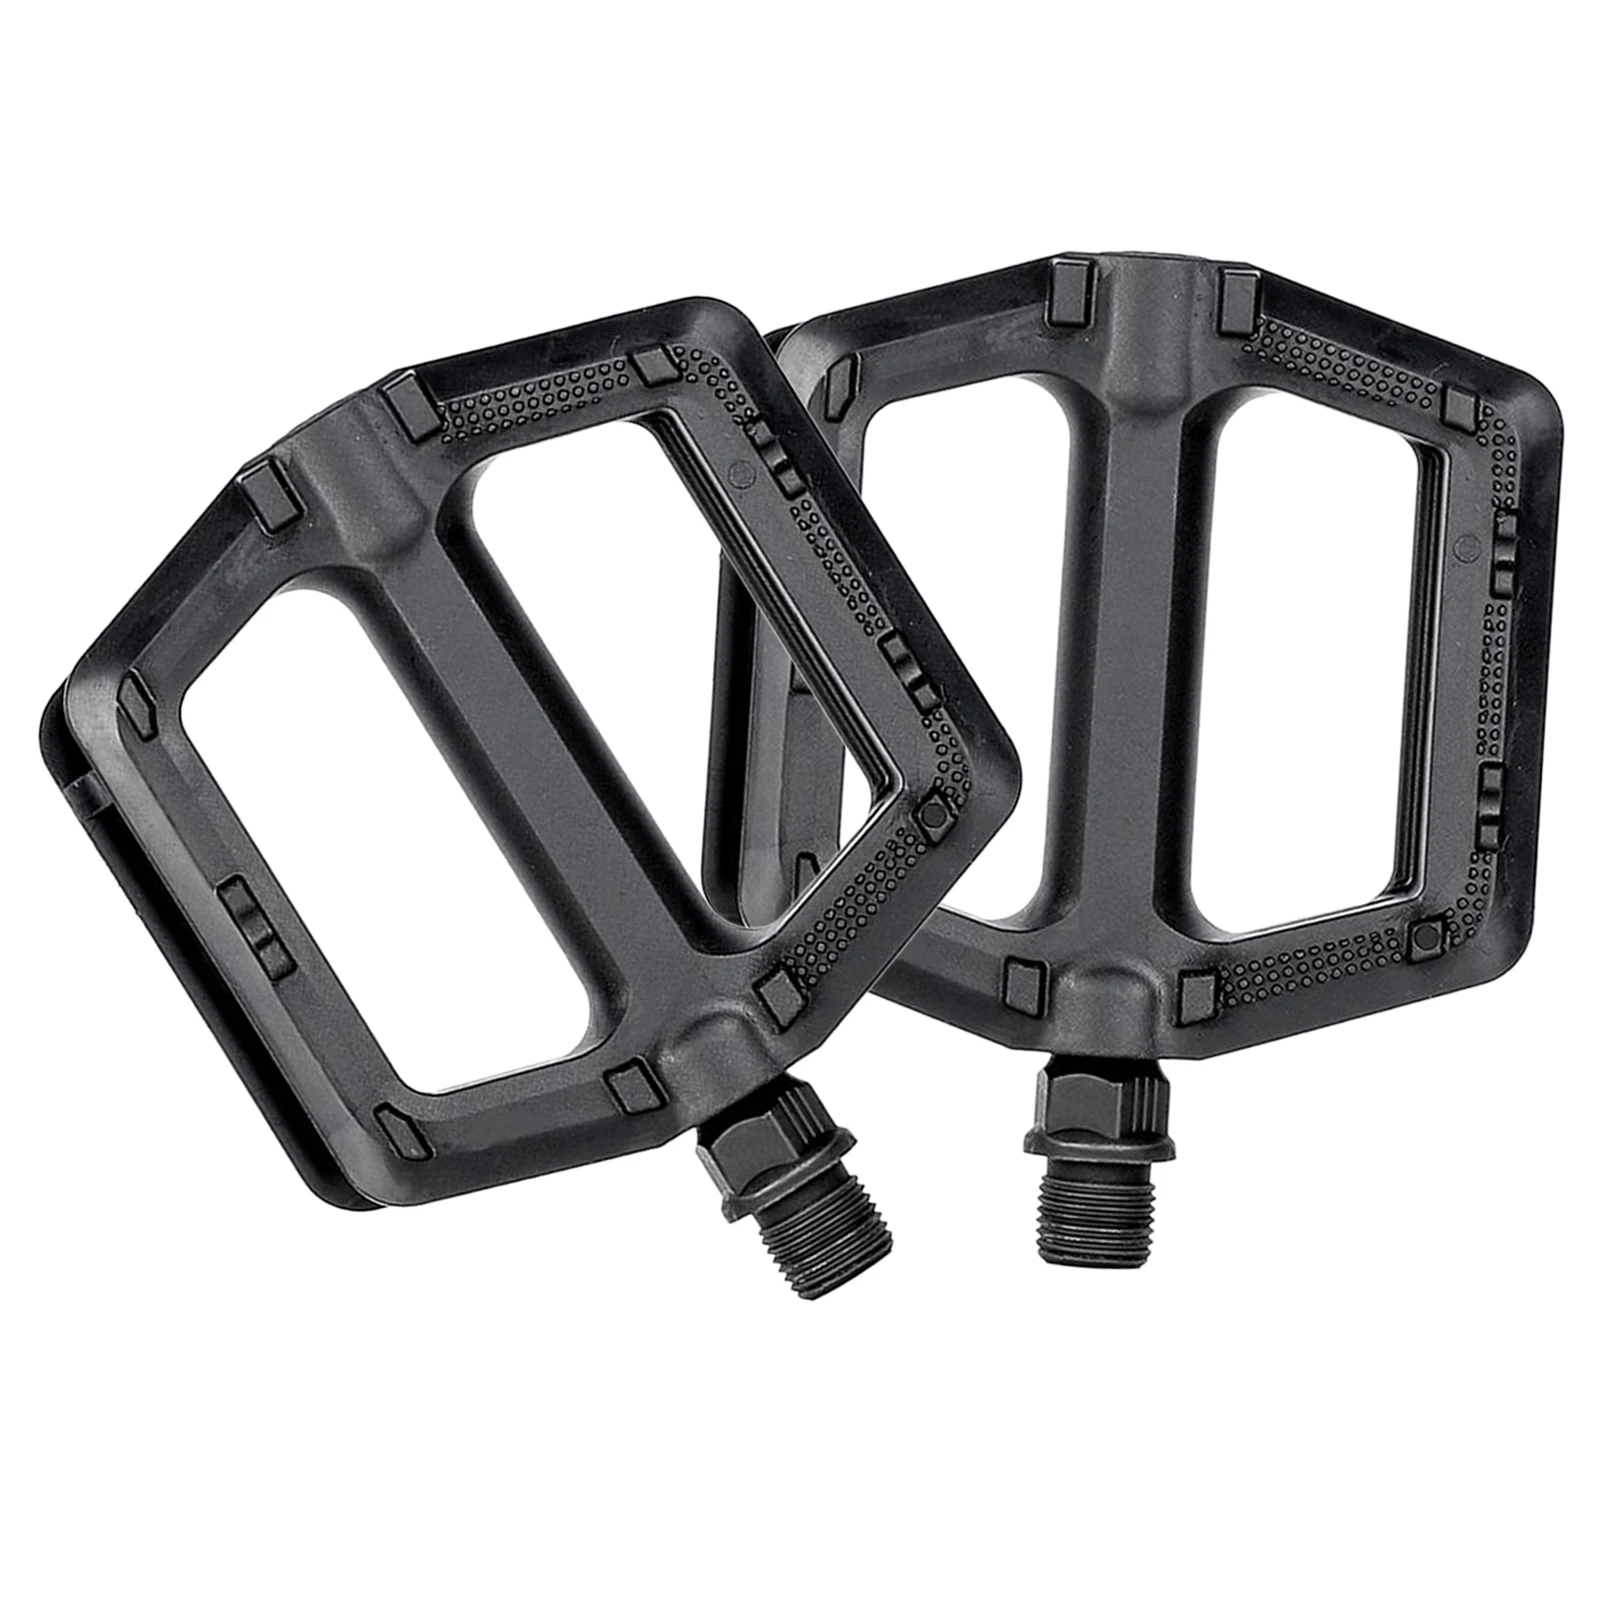 1 Pair High Quality Portable MTB Bike Bicycle Pedals Plastic Road Bike DU Bearing Pedals Cycling Mountain Bike Parts